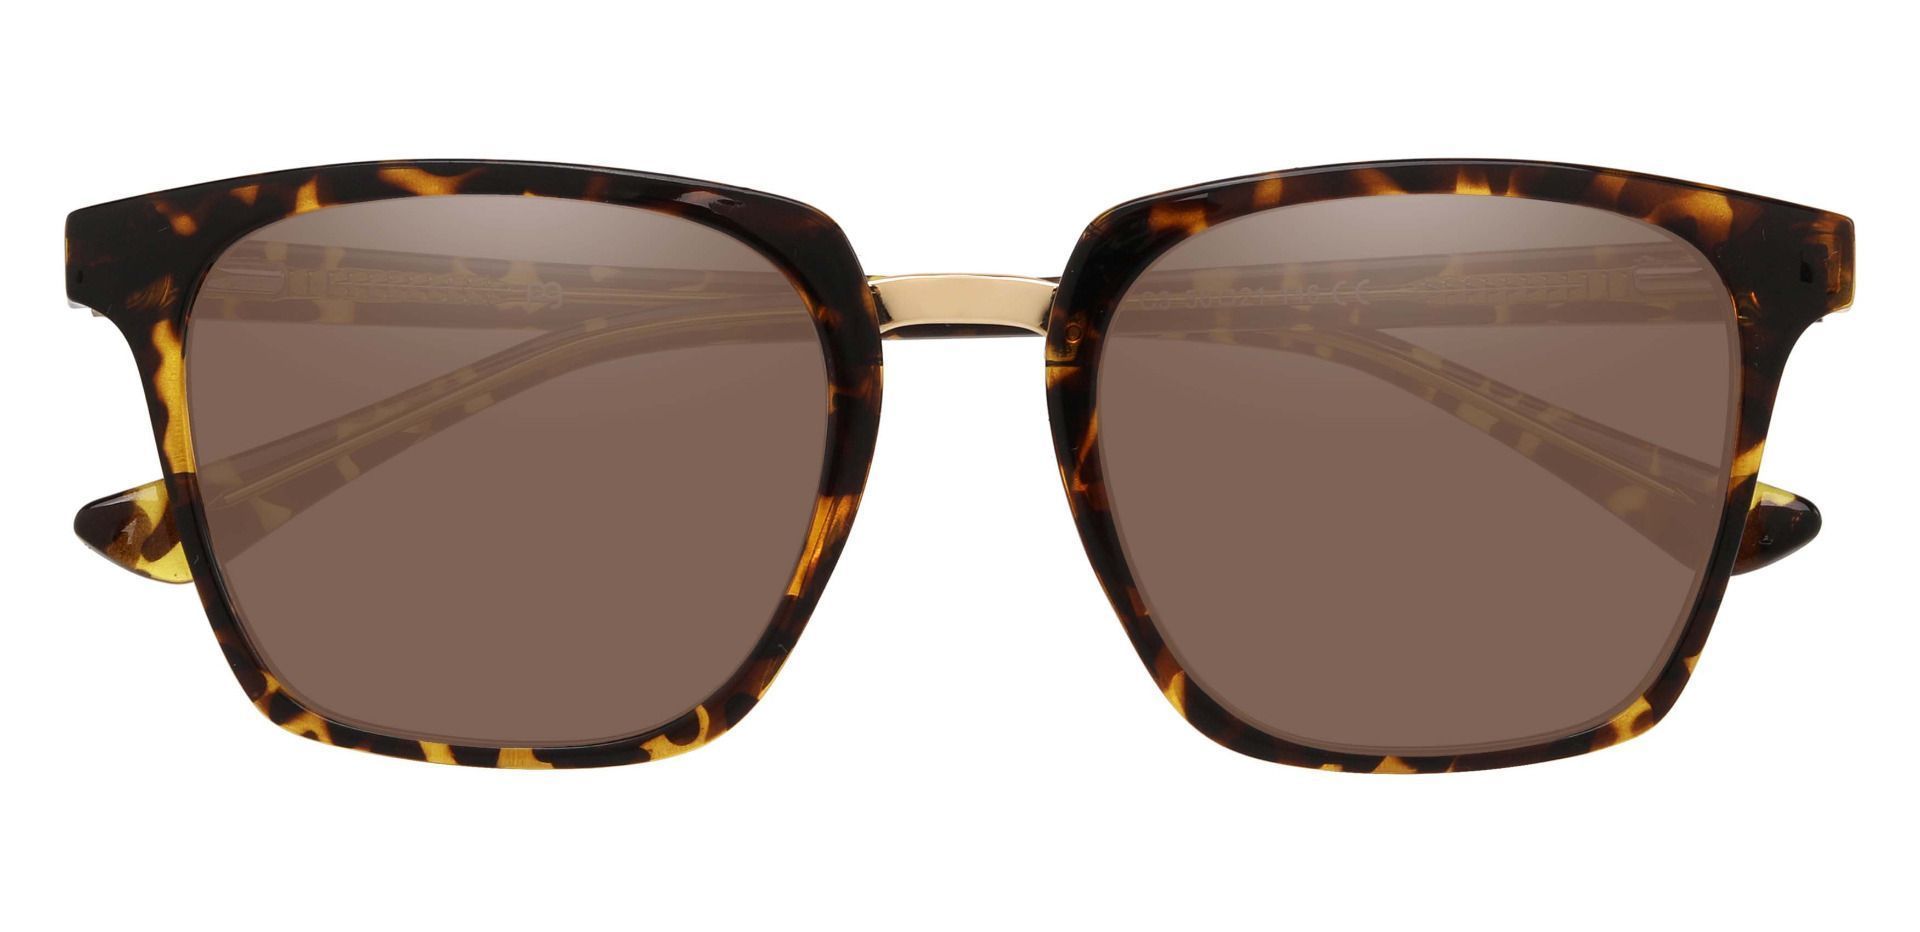 Delta Square Lined Bifocal Sunglasses - Tortoise Frame With Brown Lenses